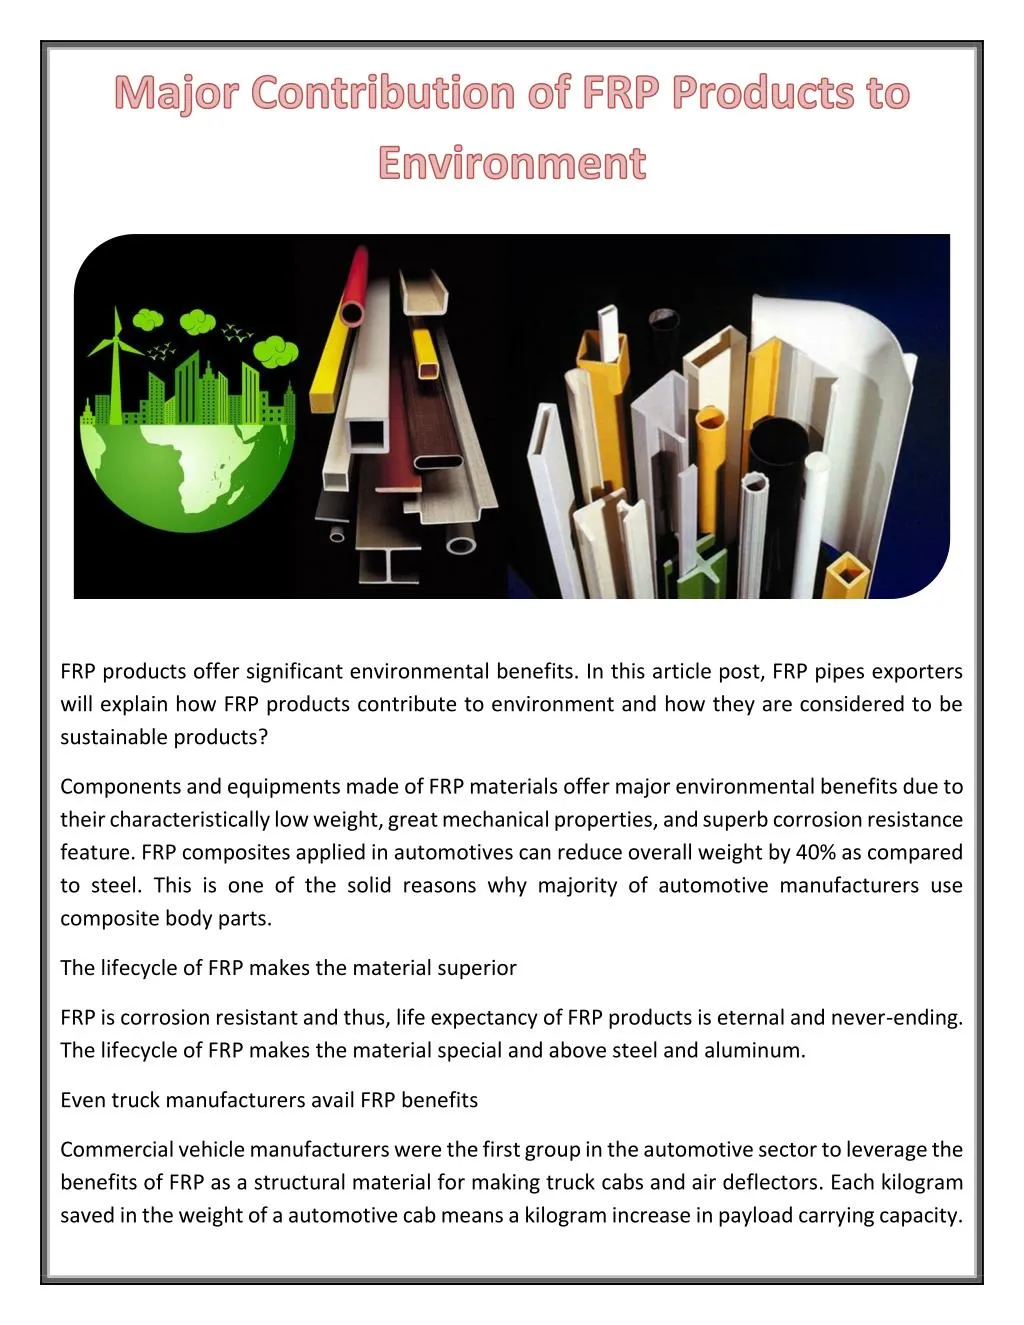 frp products offer significant environmental